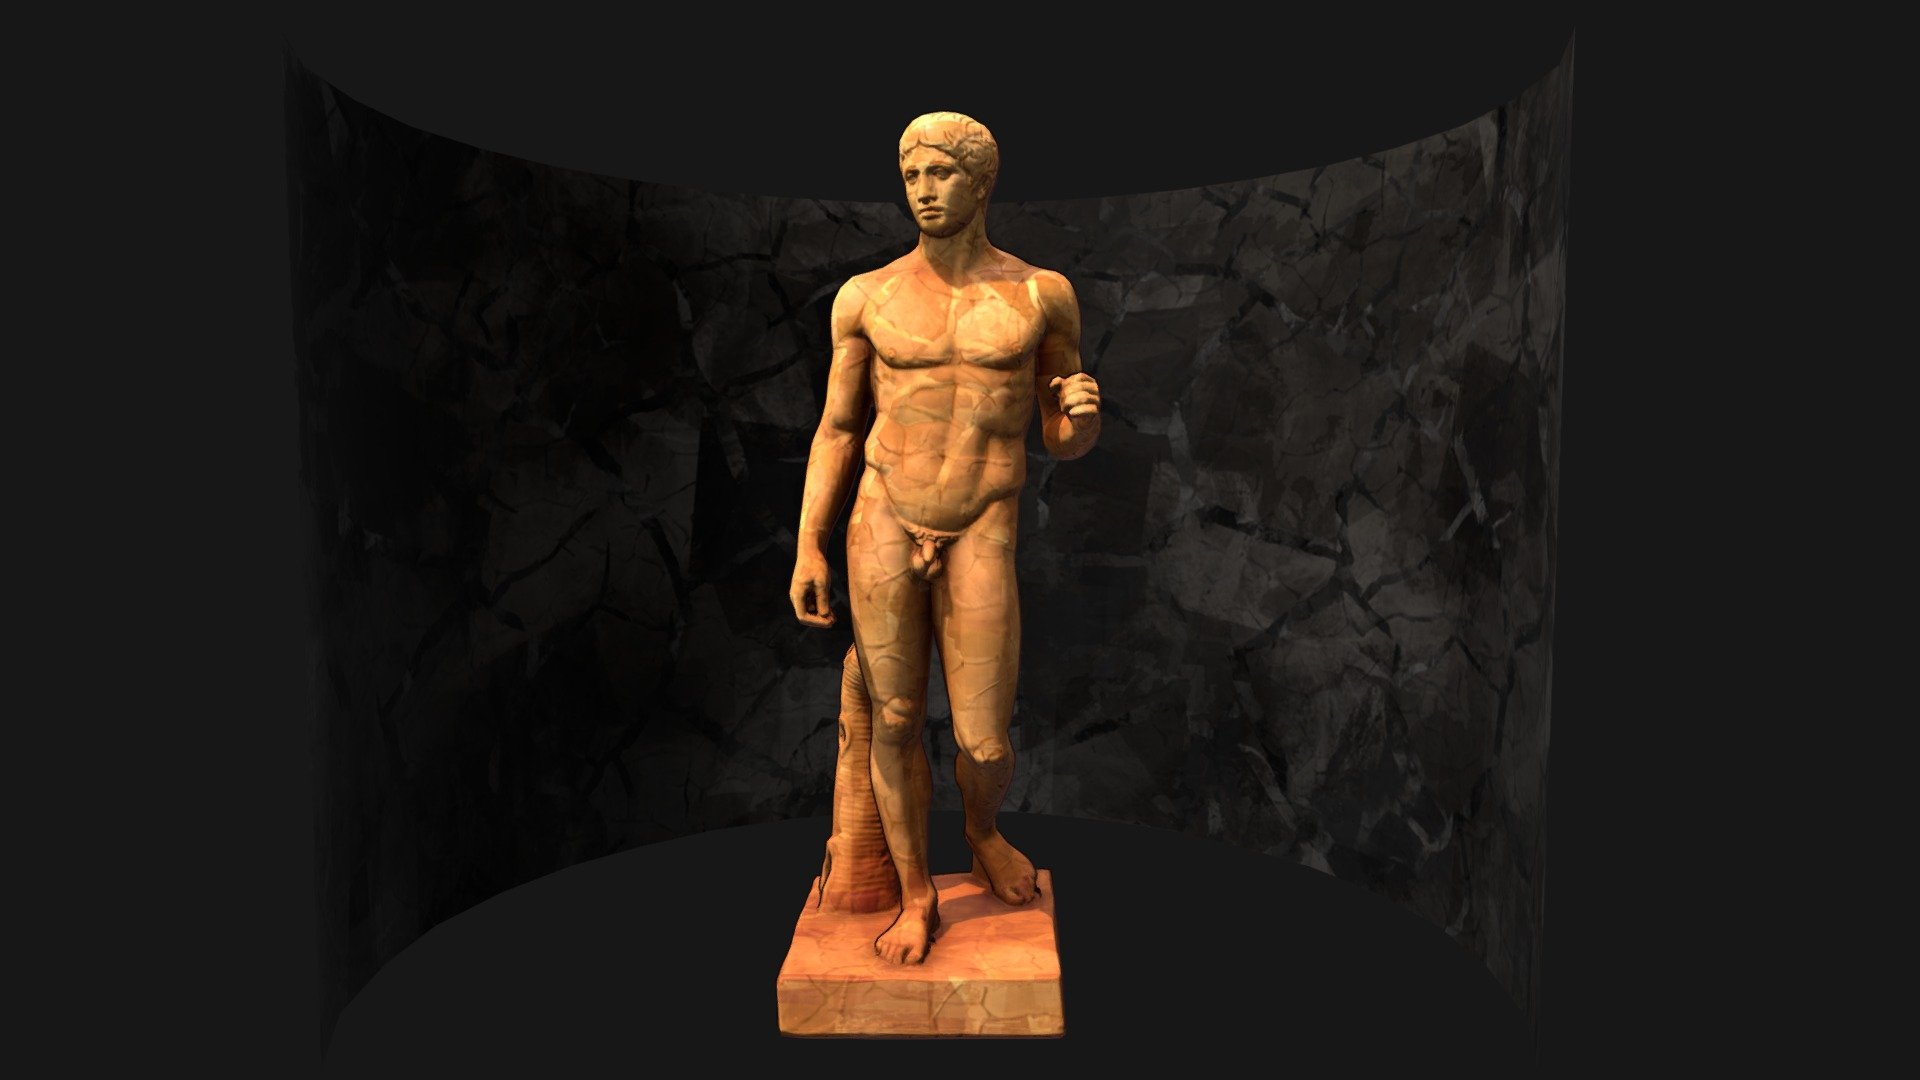 Here is my entry for the #Statuestexturingchallenge!
I've textured the statue using a custom smart material created in Quixel, made of few different hand-painted textures ;) Hope you guys enjoy!

I've been inspired in colours, textures and final look by the ancient greek's pottery (like this ;) https://www.metmuseum.org/toah/images/hb/hb_07.286.65.jpg )

(https://sketchfab.com/models/2b213f98afa742a5880af130b4d4eddc)